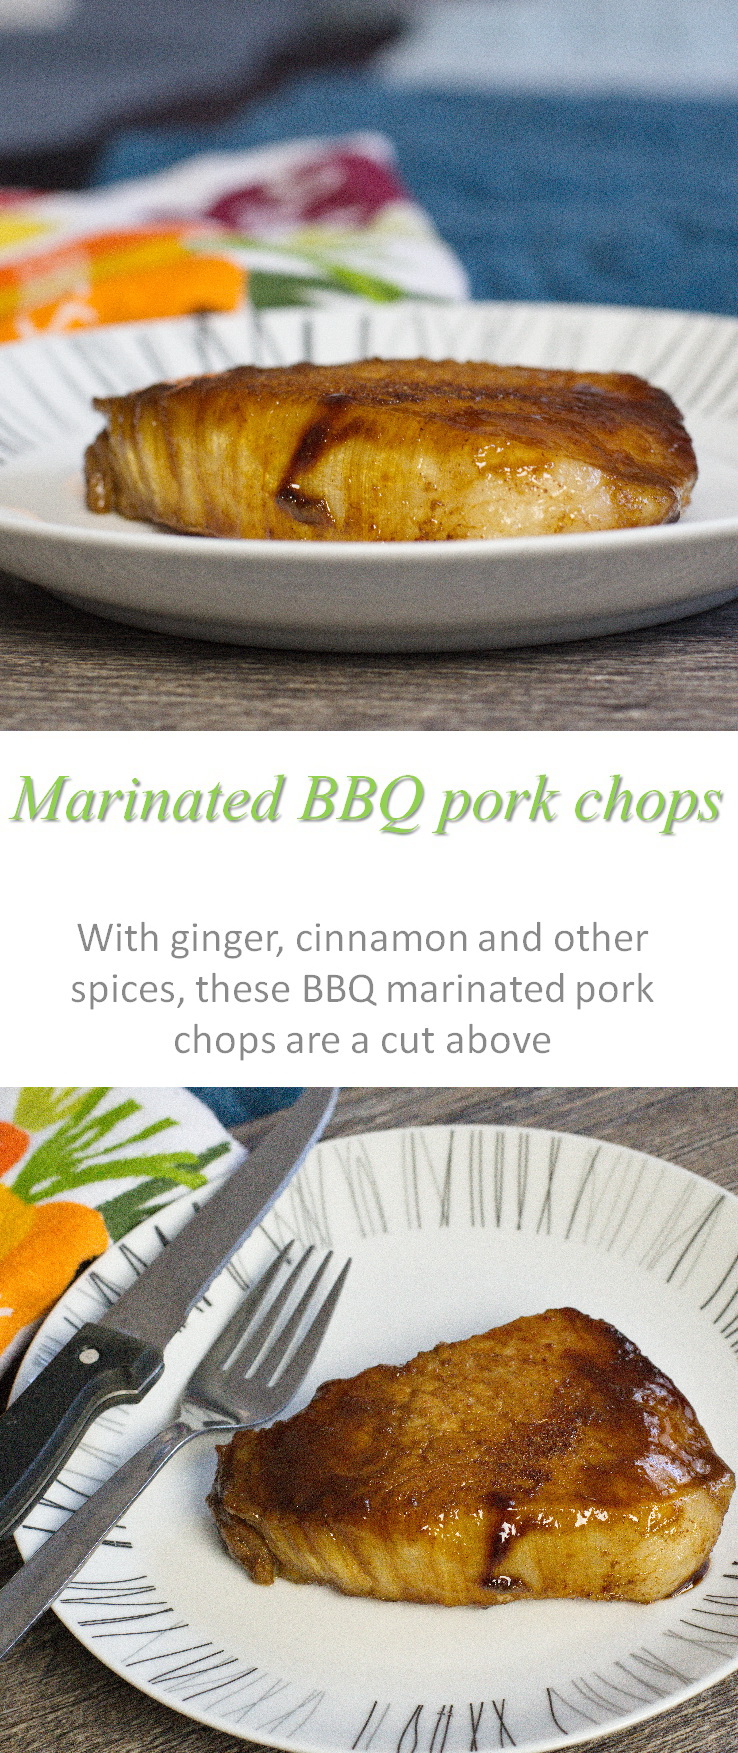 Pork chops with a paleo-friendly BBQ marinade that will get your taste-buds tingling! #BBQ